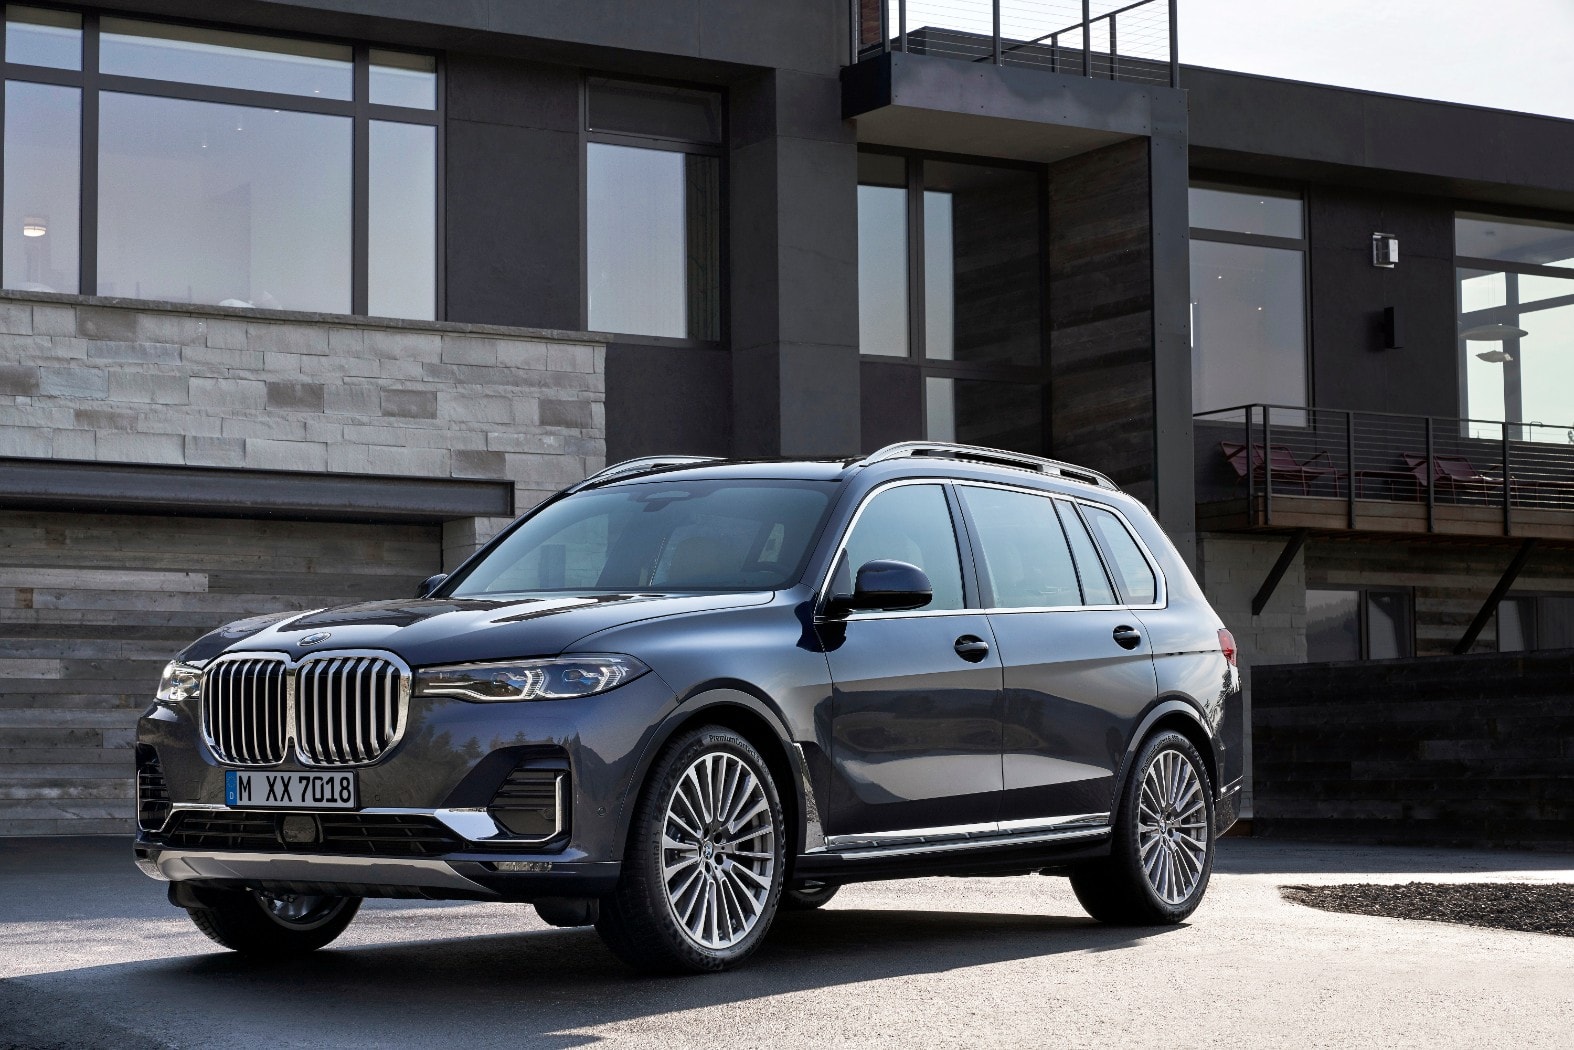 2020 BMW X7 G07 Goes Official With 7 Seats And Gigantic Kidney